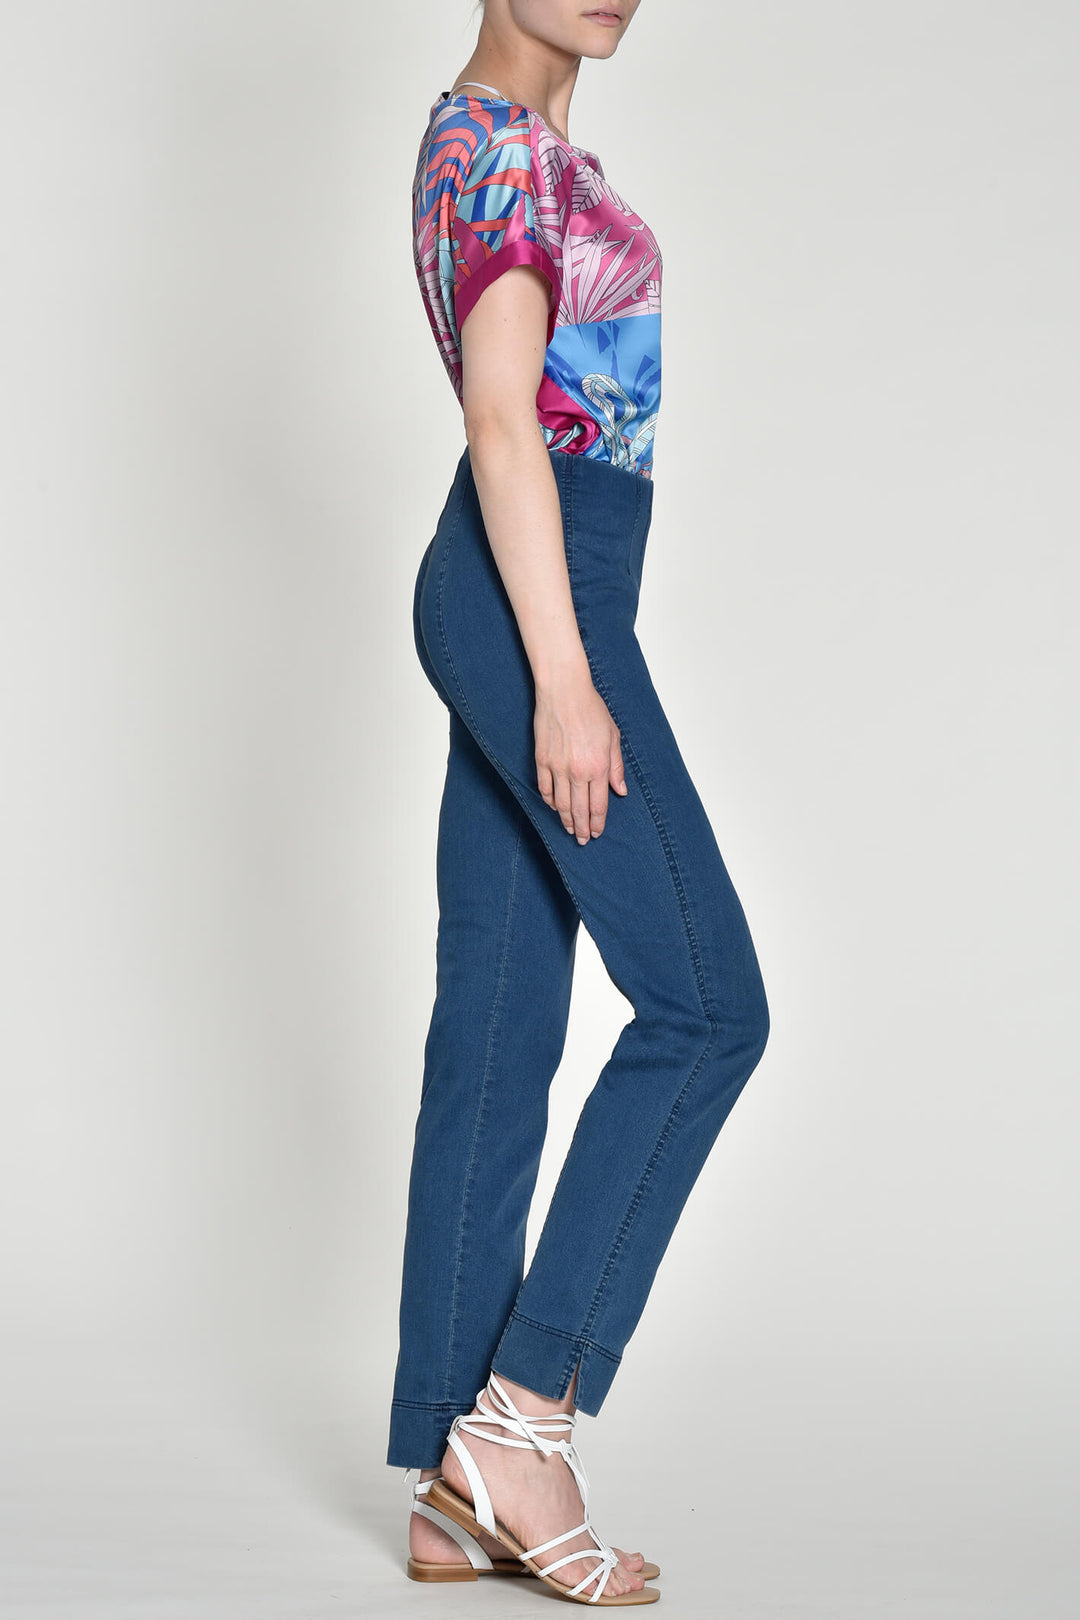 Robell Marie 51639-5448-64 78cm Blue Pull-On Trousers - Shirley Allum Boutique